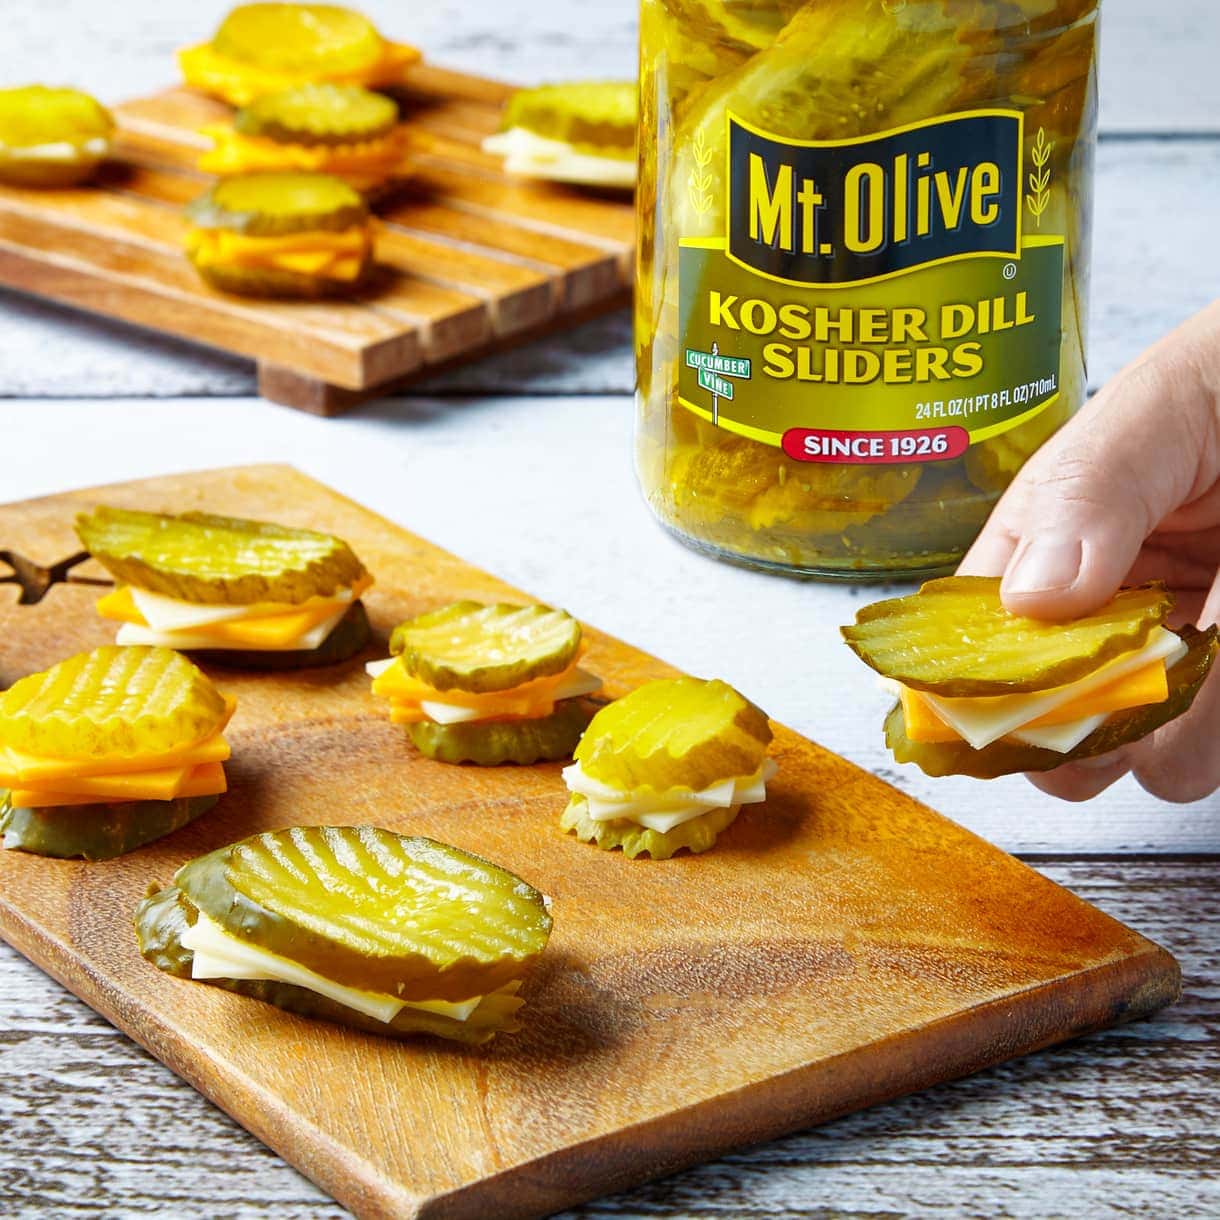 wood cutting board with pickle and cheese snackers.Kosher Dill Slider Pickles with slices of cheese on them like mini sandwiches.